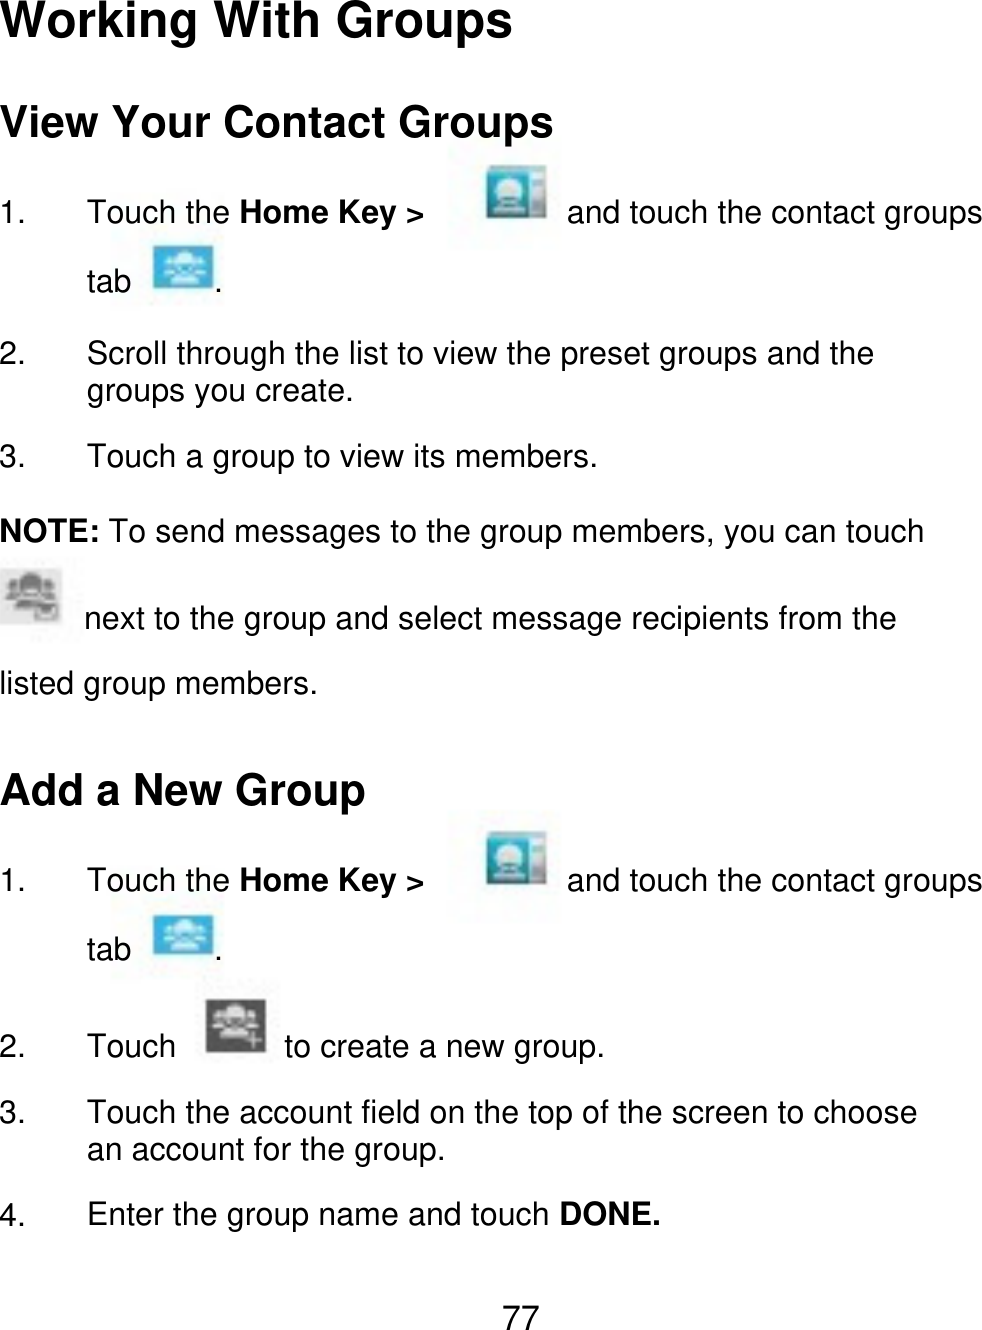 Working With Groups View Your Contact Groups 1. Touch the Home Key &gt; tab 2. 3. . and touch the contact groups Scroll through the list to view the preset groups and the groups you create. Touch a group to view its members. NOTE: To send messages to the group members, you can touch next to the group and select message recipients from the listed group members. Add a New Group 1. Touch the Home Key &gt; tab 2. 3. 4. Touch . to create a new group. and touch the contact groups Touch the account field on the top of the screen to choose an account for the group. Enter the group name and touch DONE. 77 